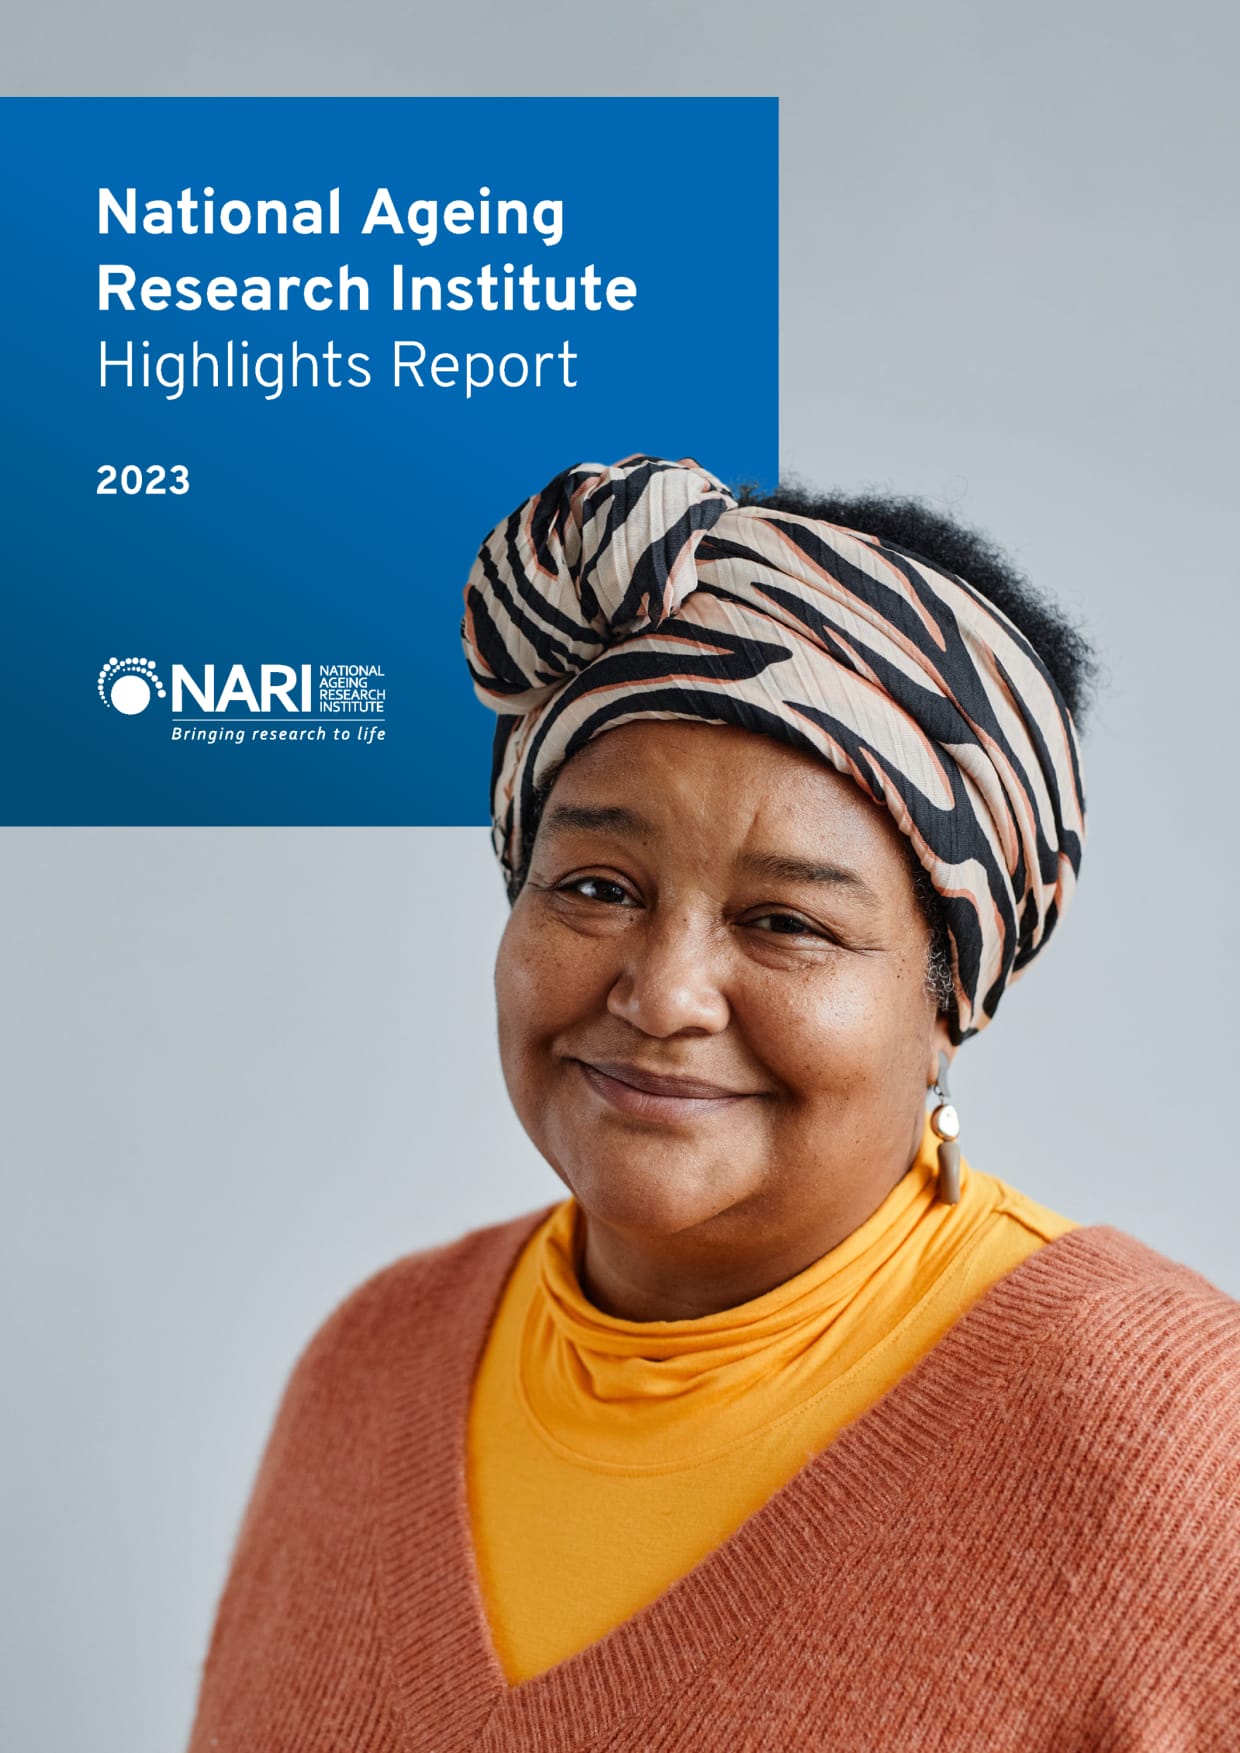 Image of cover of 2023 NARI Highlights Report, features portrait of an older African woman, smiling. She is wearing a headwrap, a yellow skivvy and a brown woolen jumper.